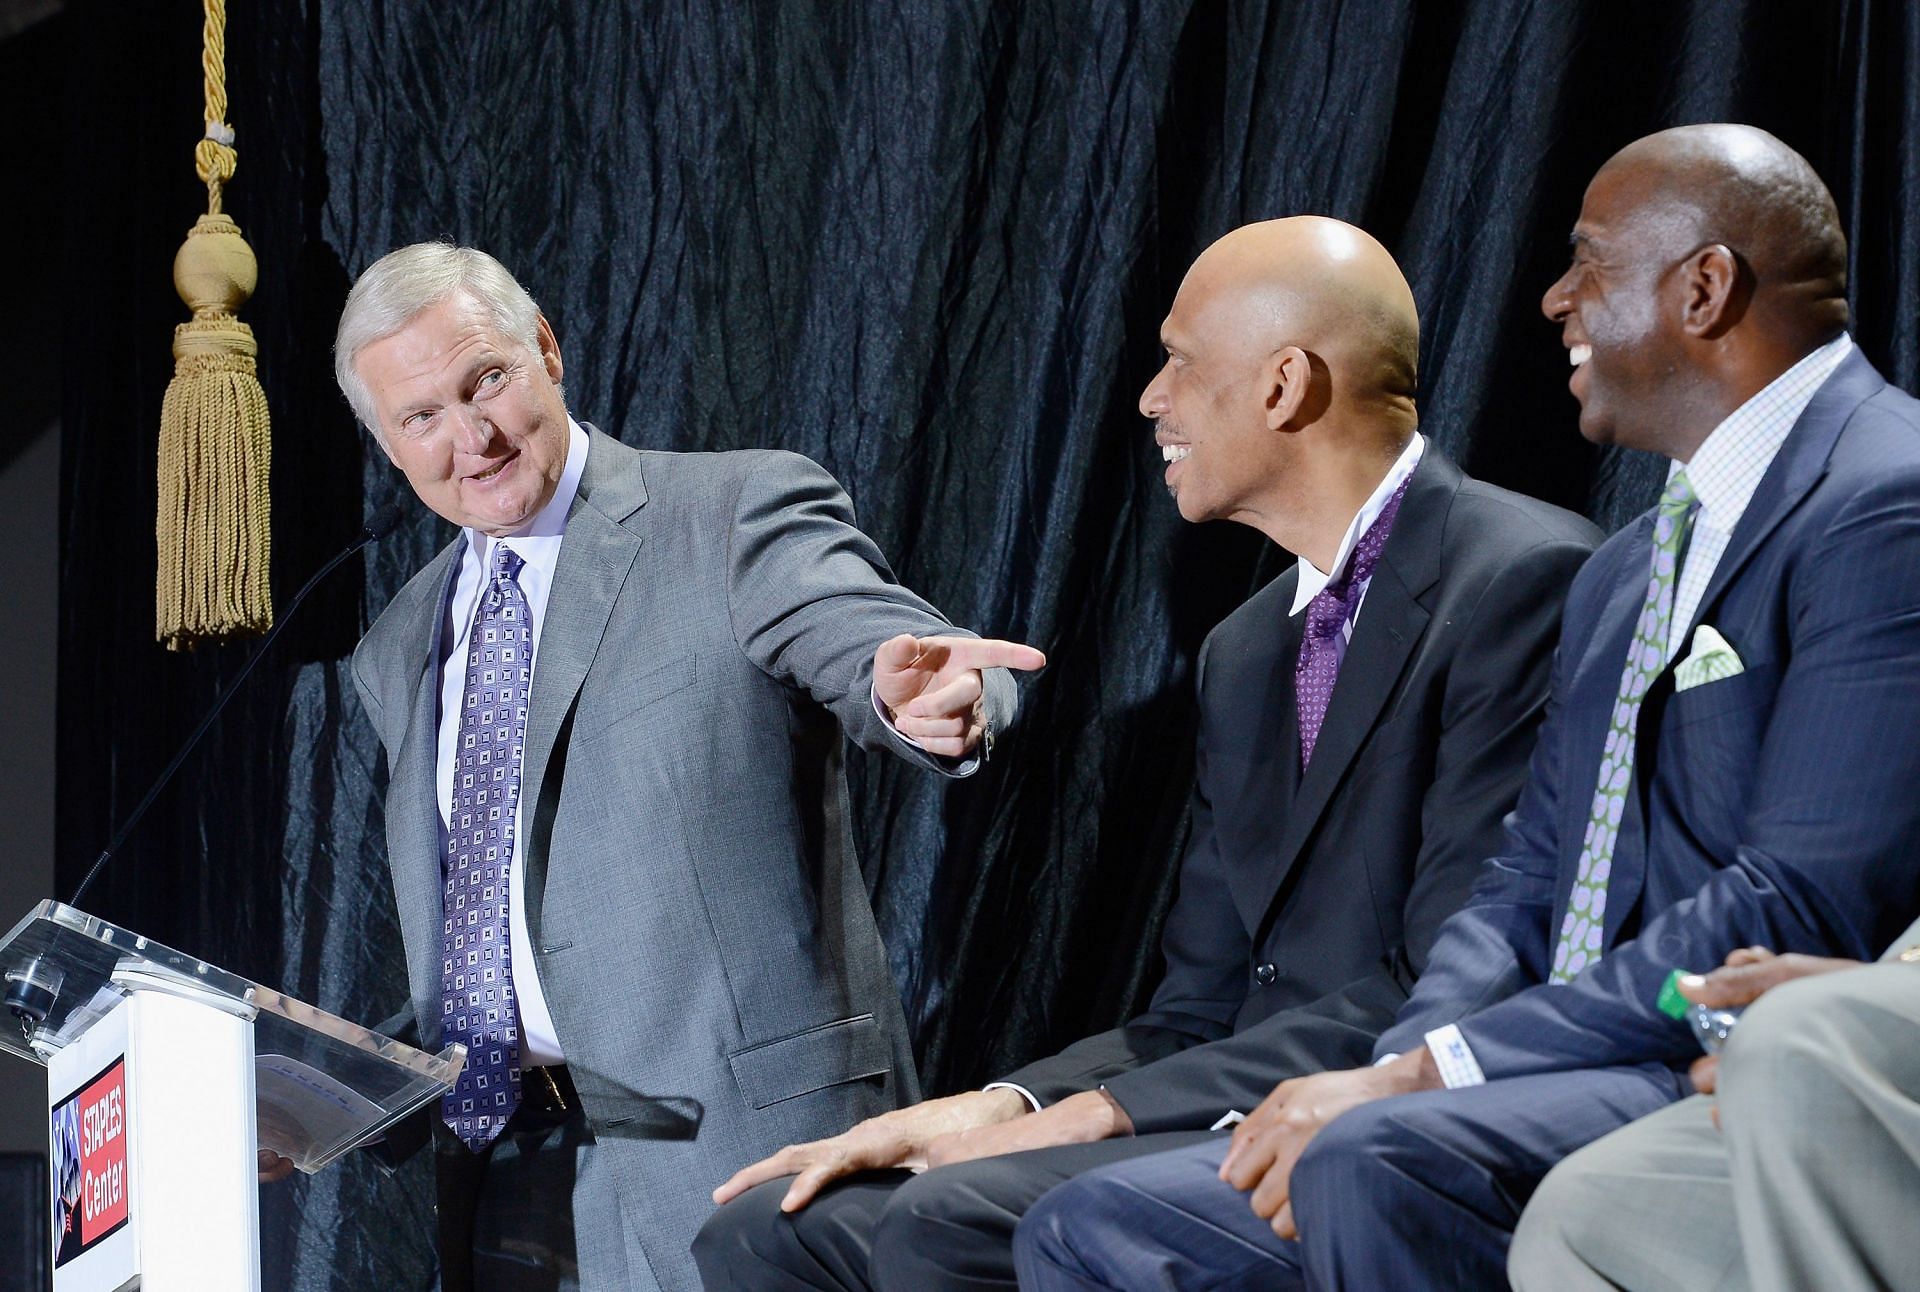 Jerry West, Kareem Abdul-Jabbar and Magic Johnson at a statue unveiling in Staples Center.